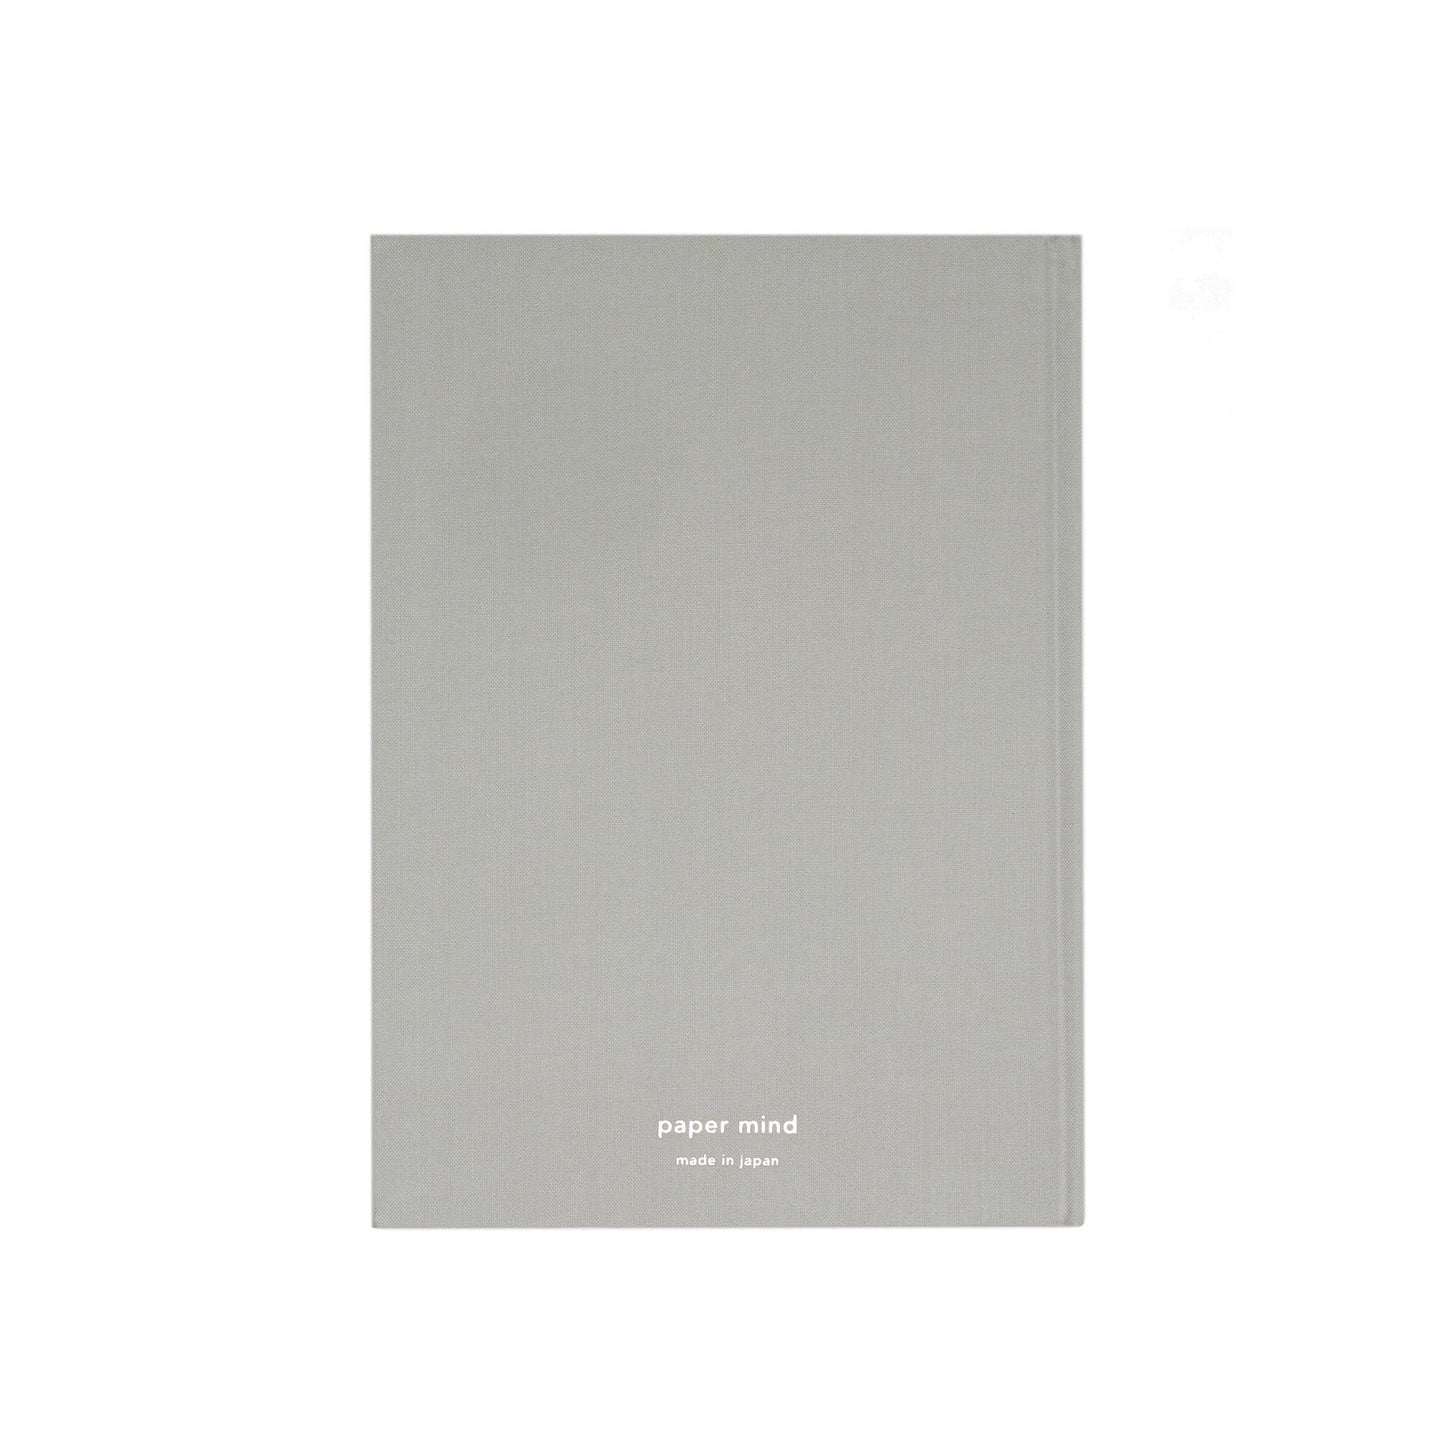 The Paper Mind Passepied Cream Hardcover Notebook. Fountain pen friendly Journal. Light gray Japanese Linen Cover. Back cover shown with The Paper Mind silver foil logo